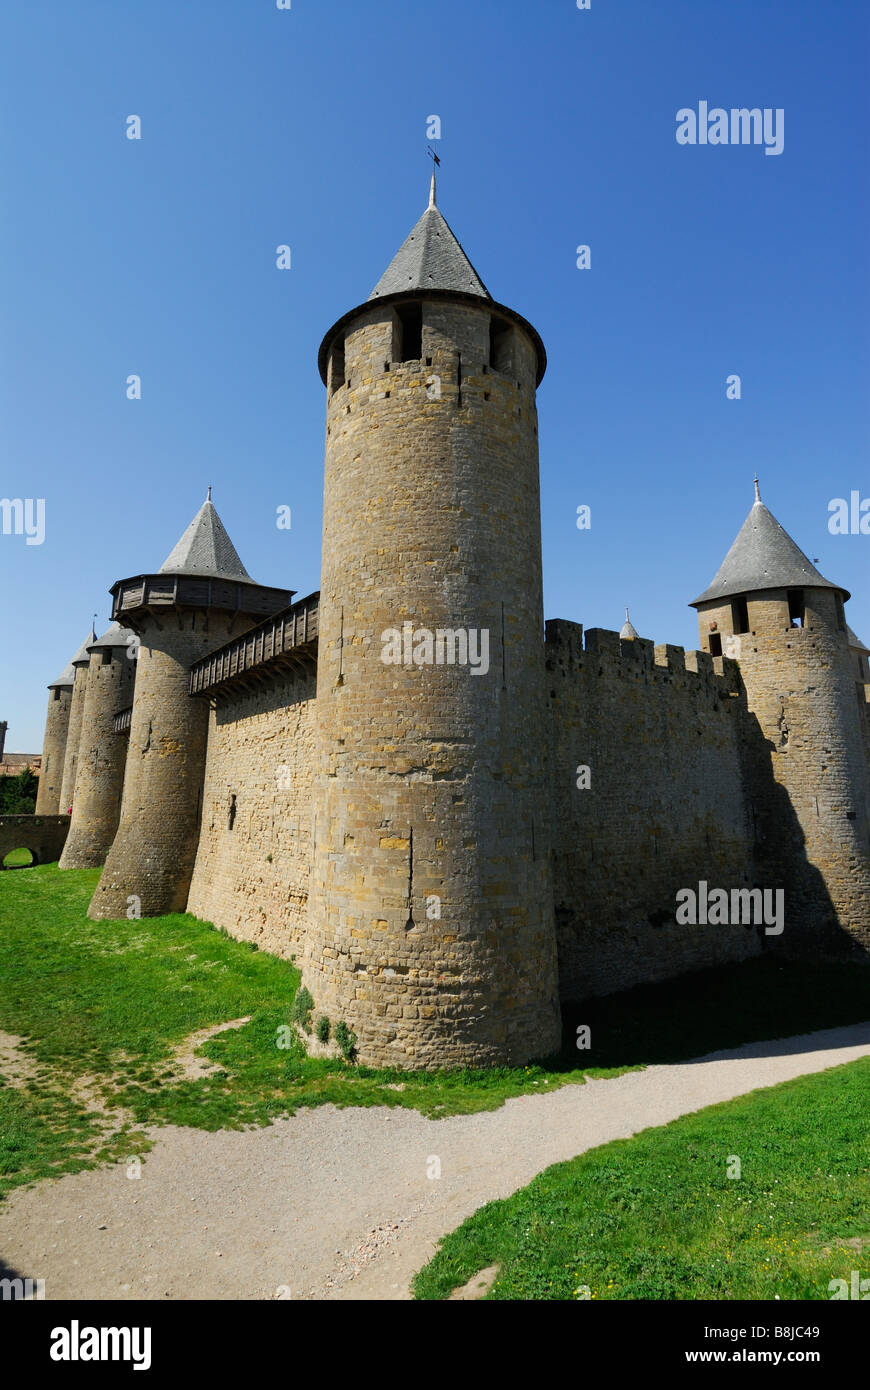 The medieval castle of Carcassonne France Stock Photo